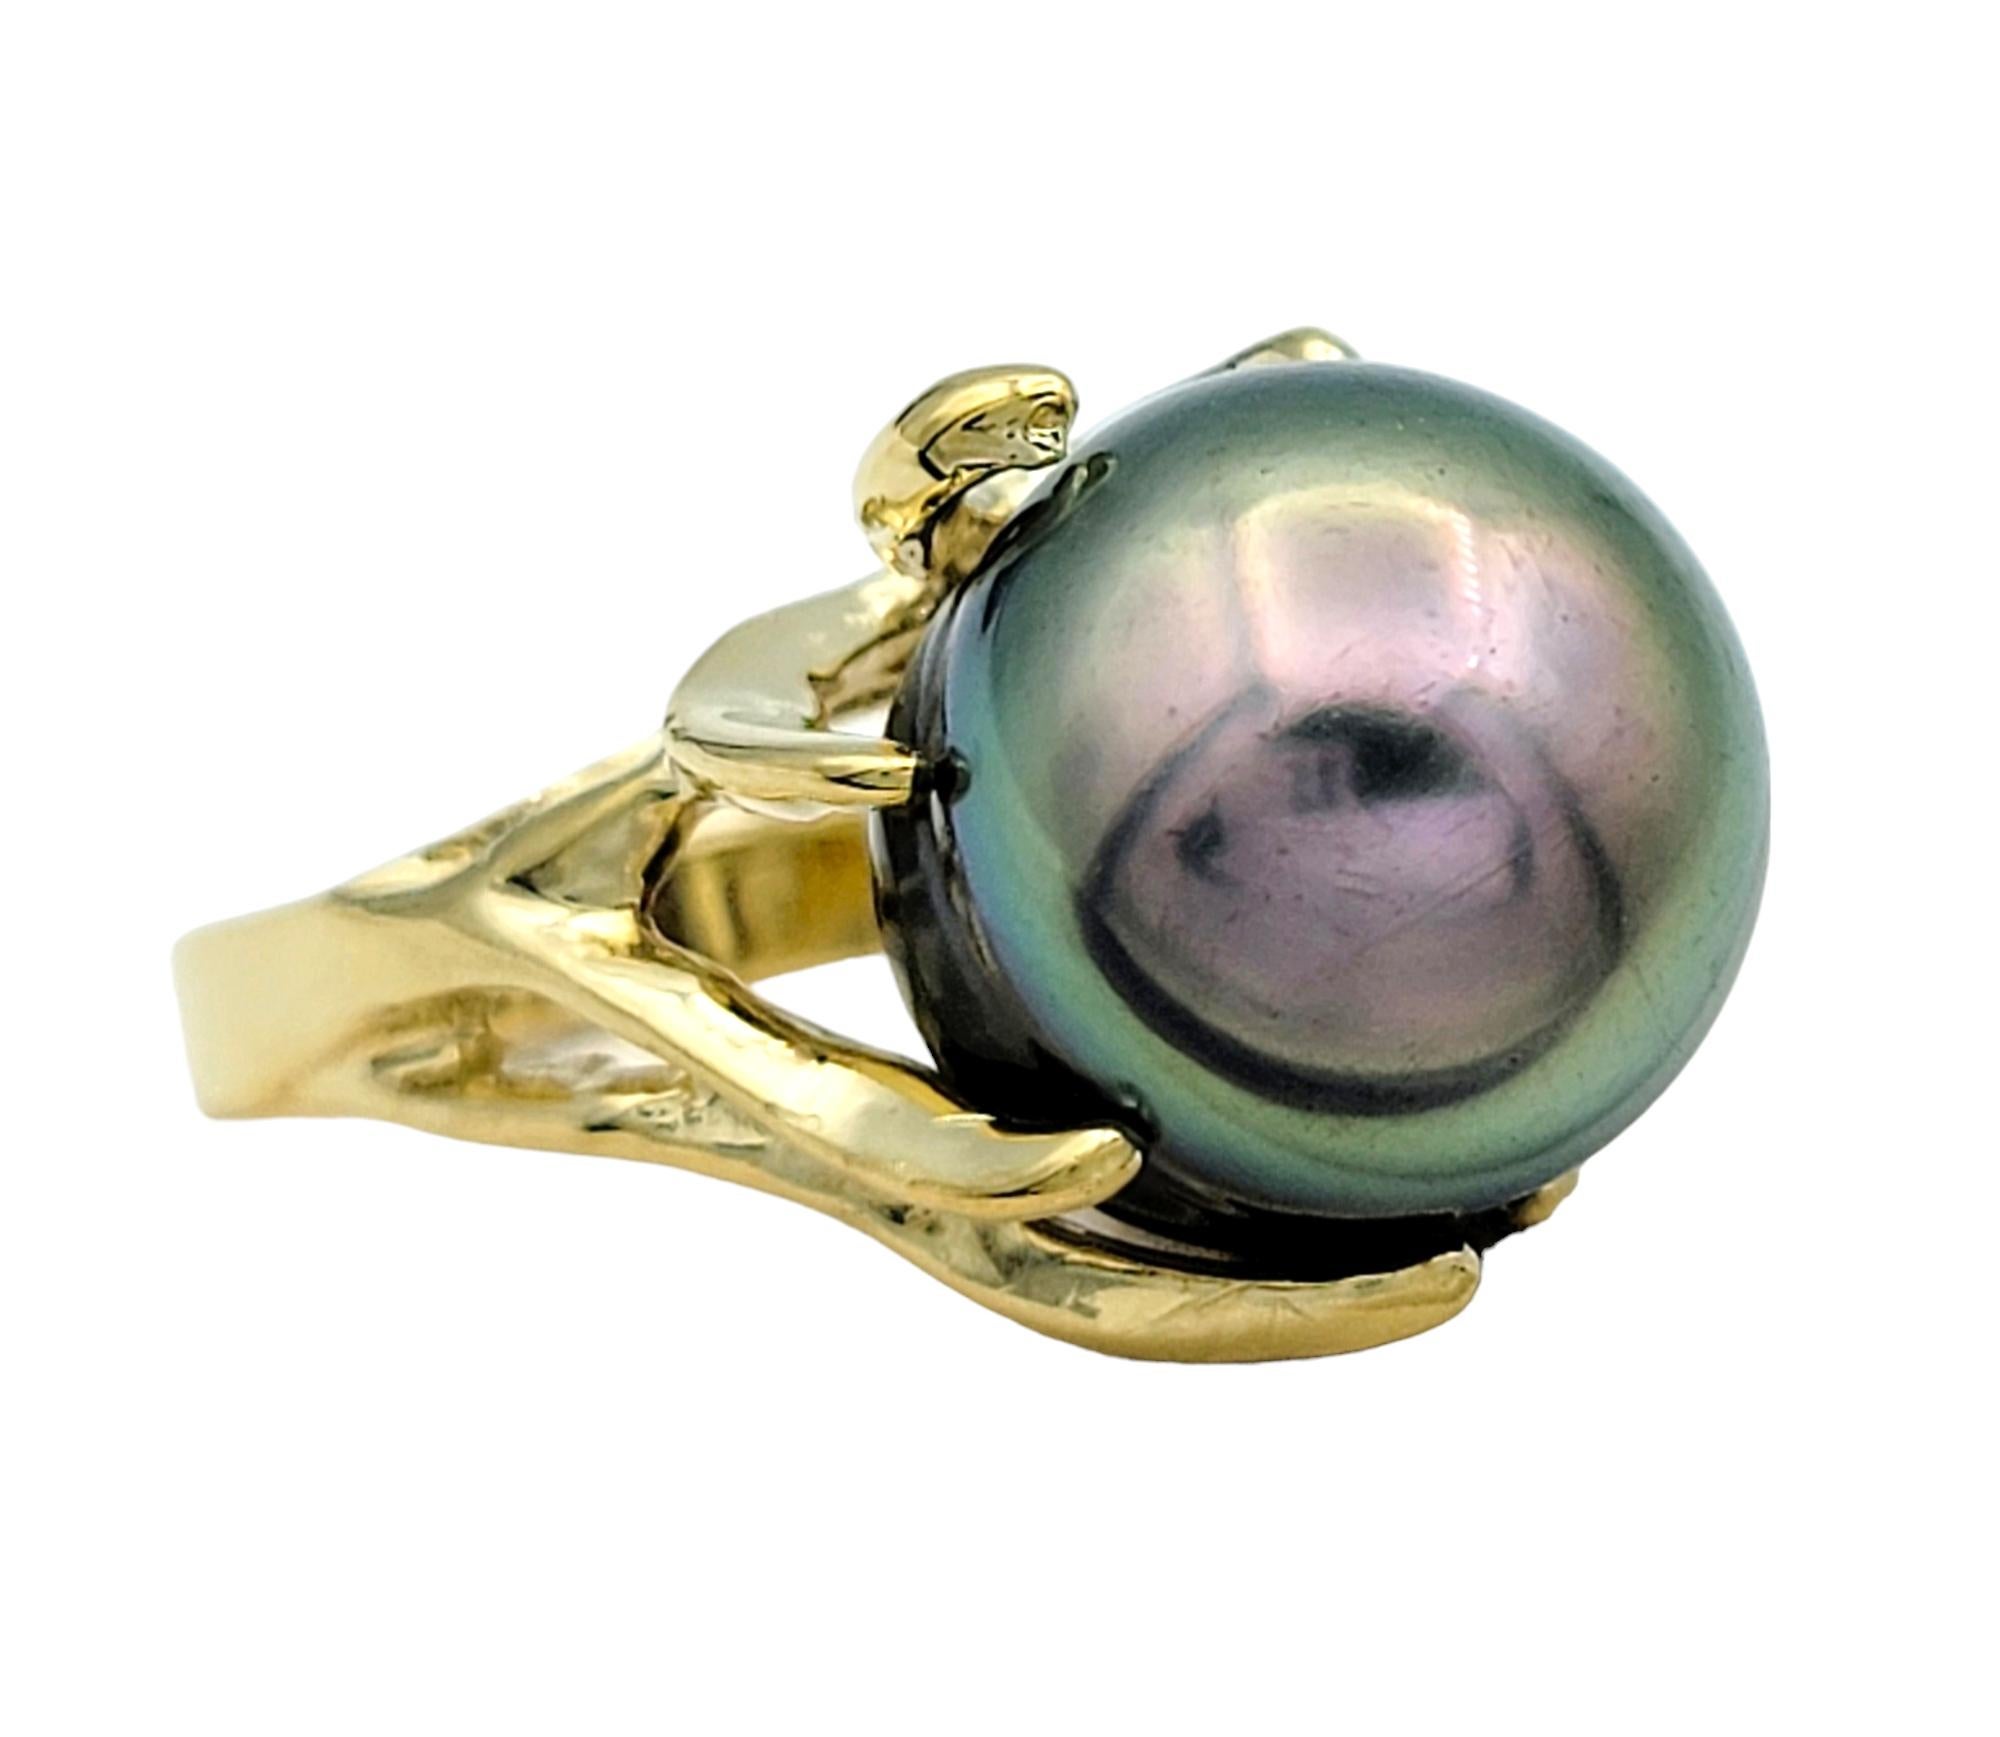 Ring Size: 6.75

This elegant black Tahitian South Sea pearl ring is a captivating addition to any fine jewelry collection. Set within a branch-like motif crafted from 14 karat yellow gold, the ring evokes a gorgeous natural beauty.

The lustrous